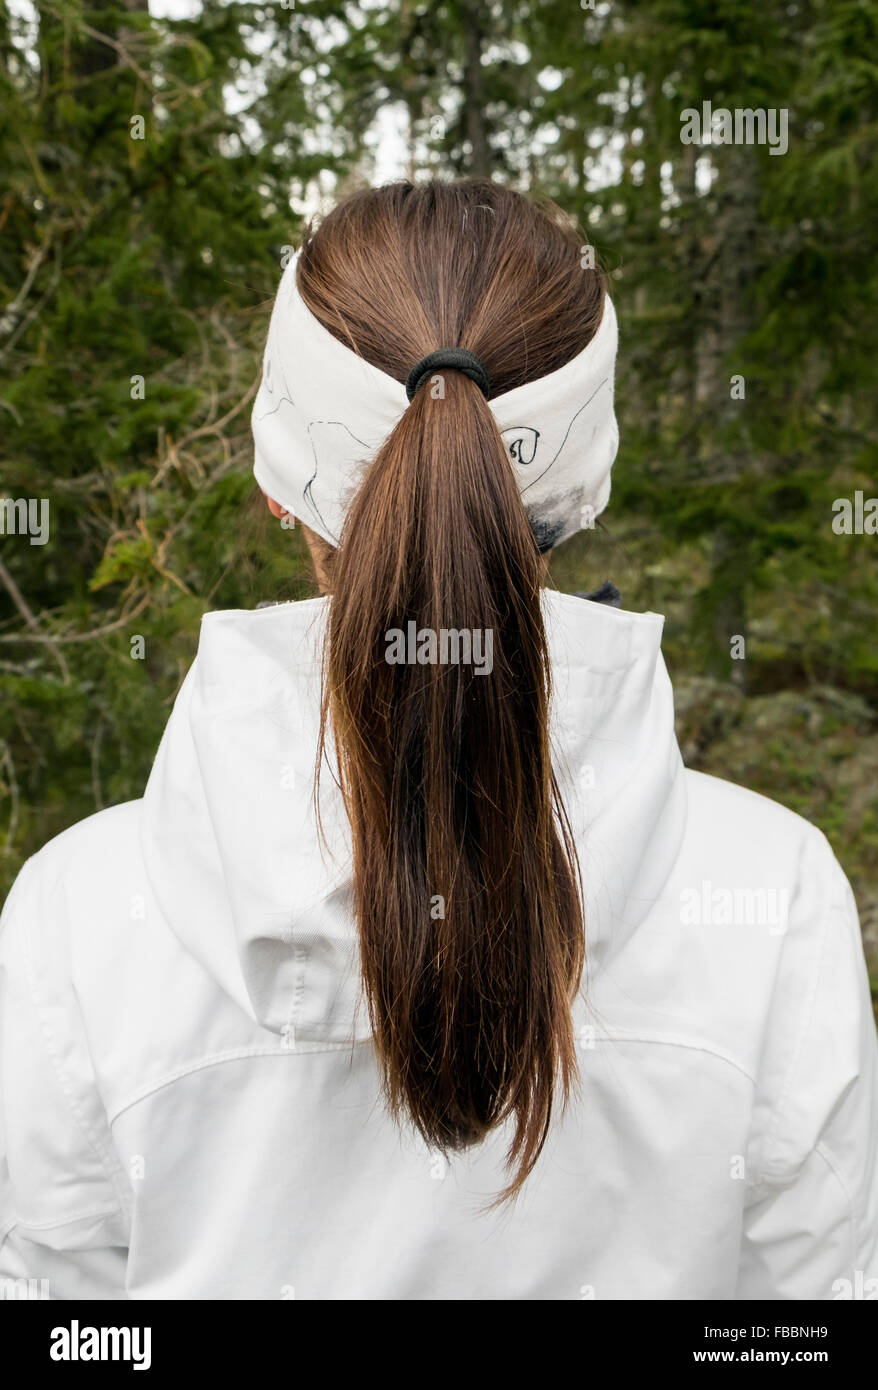 Woman with ponytail Stock Photo